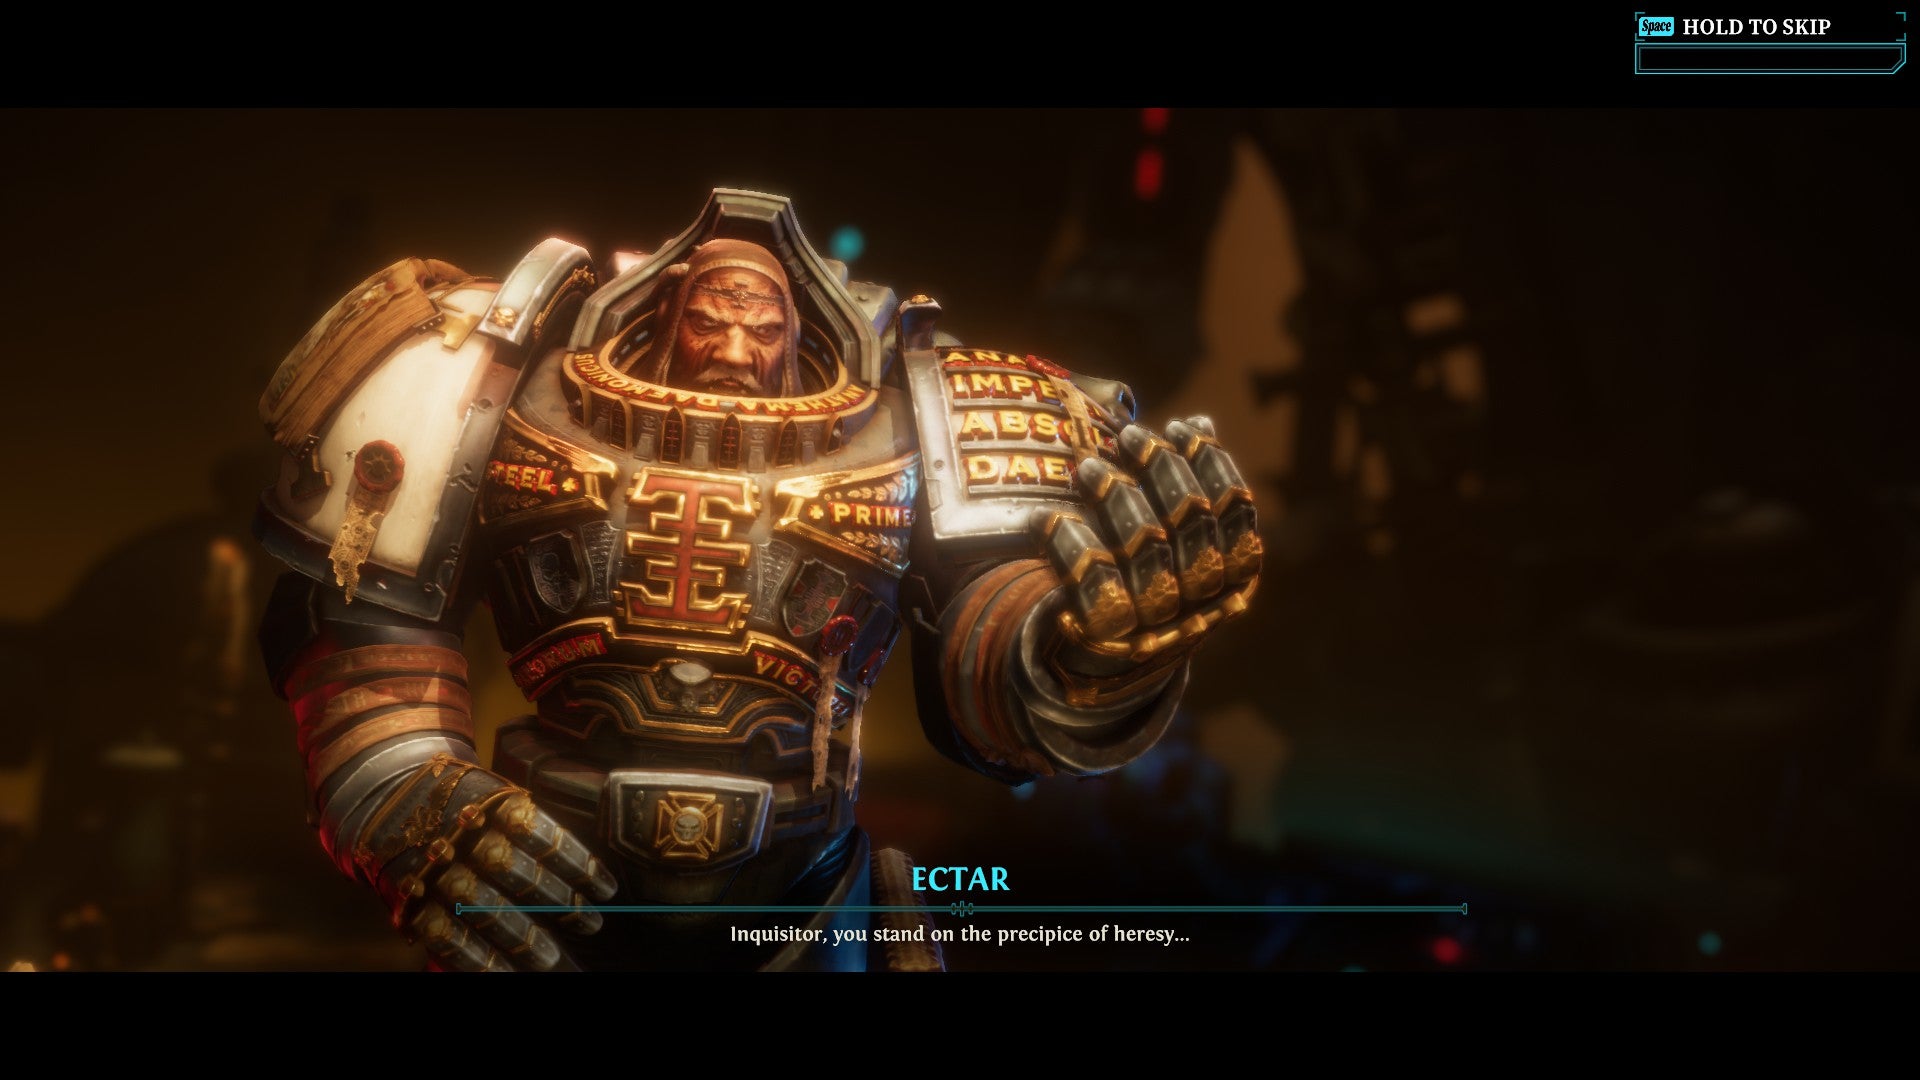 40K Chaos Gate Daemonhunters review - a cutscene shows Ectar in golden armour sternly saying "Inquisitor, you stand on the precipice of heresy..."